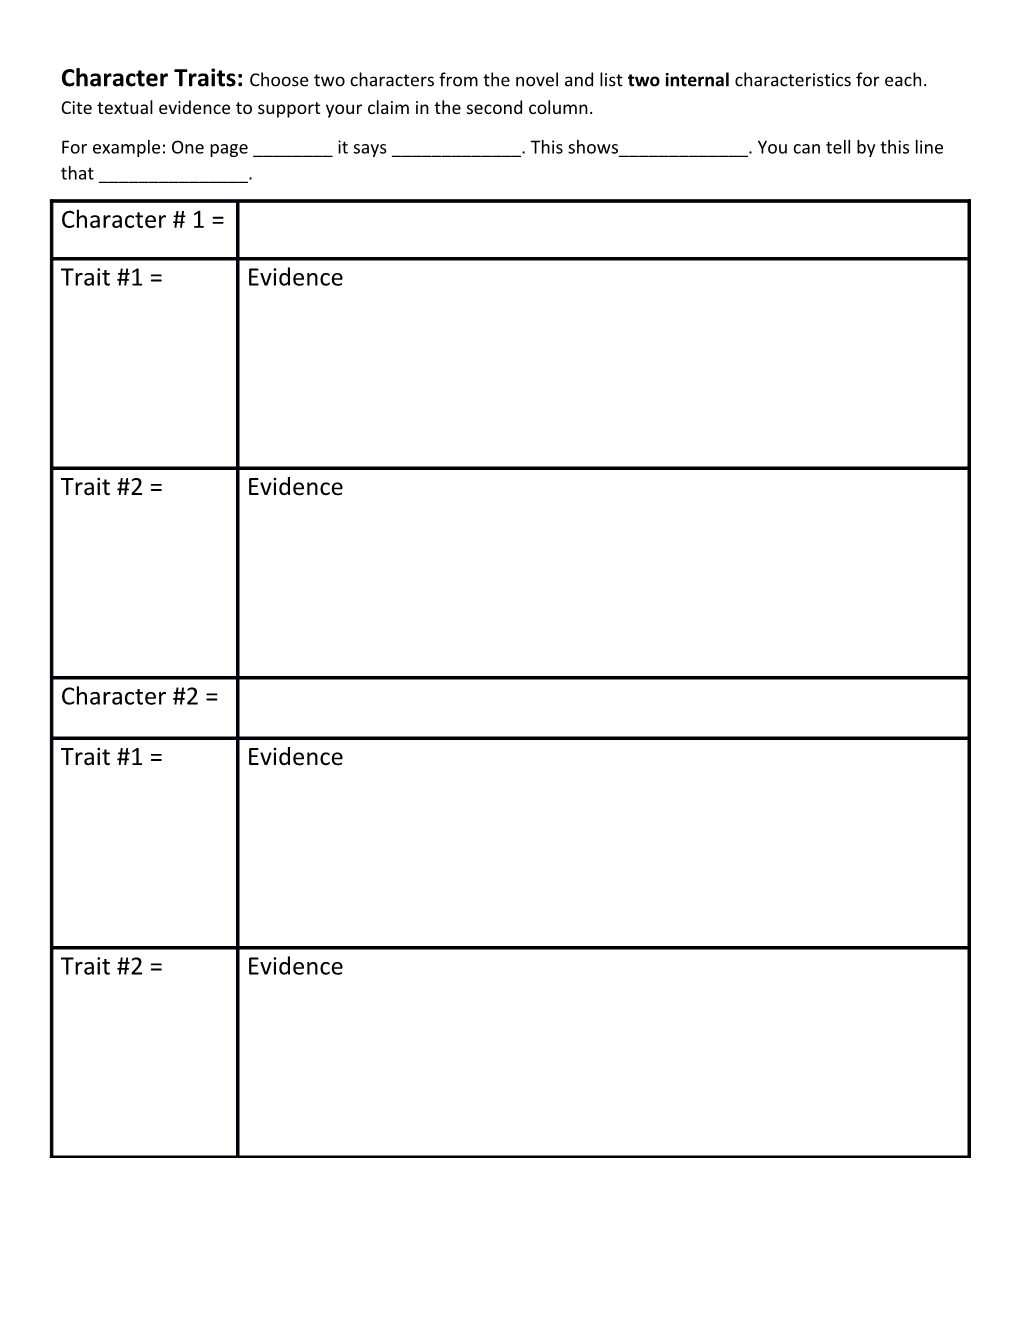 Quotation Organizer: Find Important Quotes Or Dialogue from the Novel and Your Interpretation